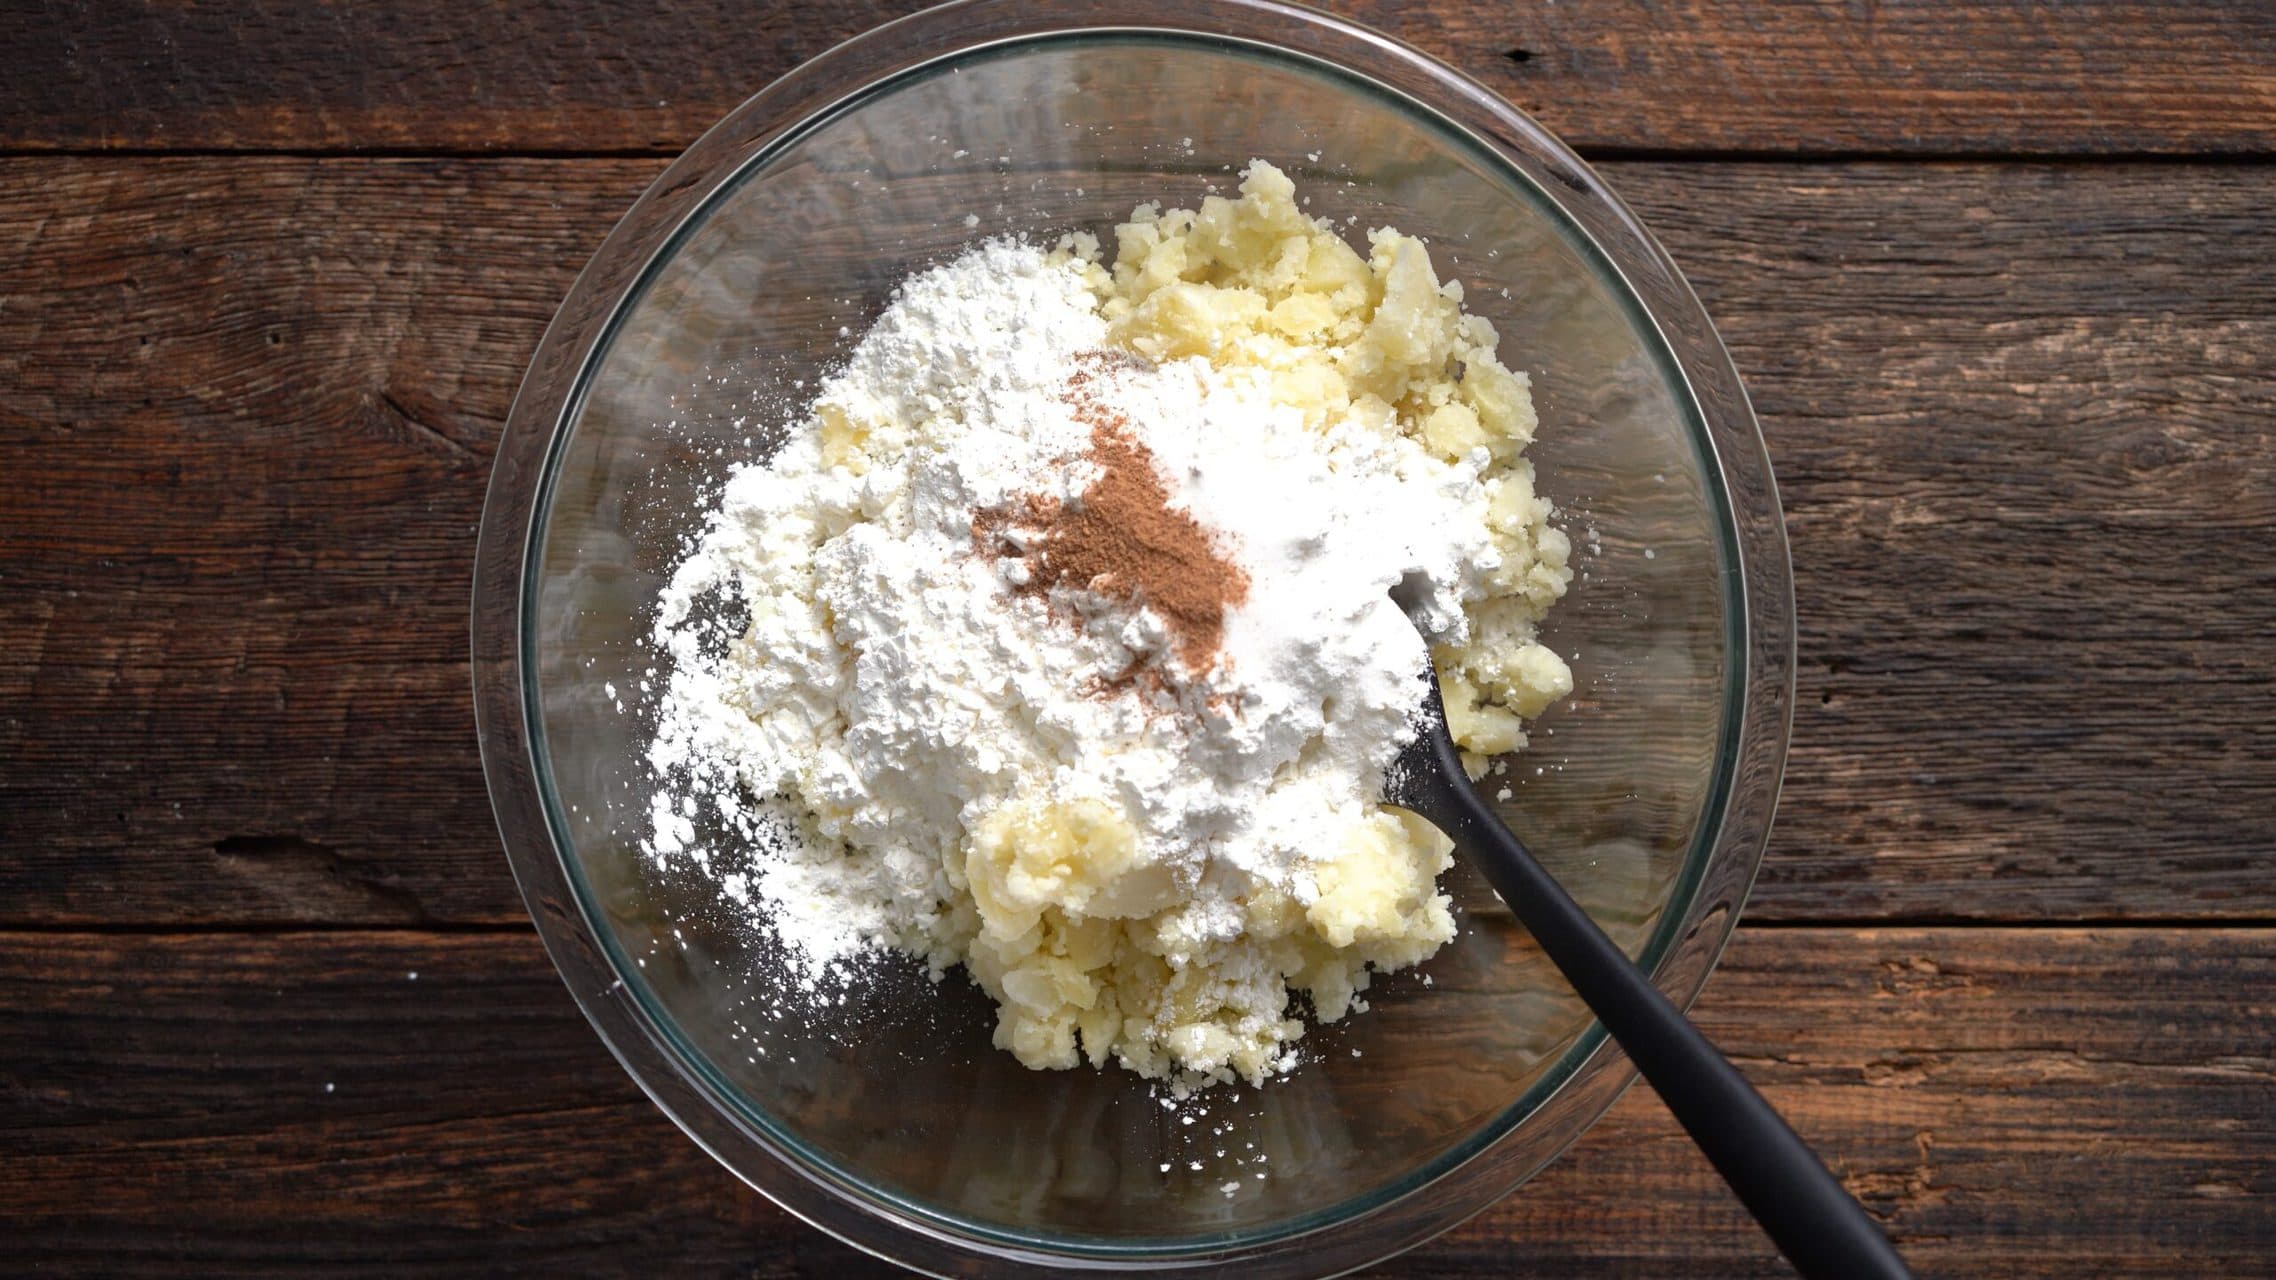 mashed potatoes in a bowl with corn starch, salt and nutmeg added on top